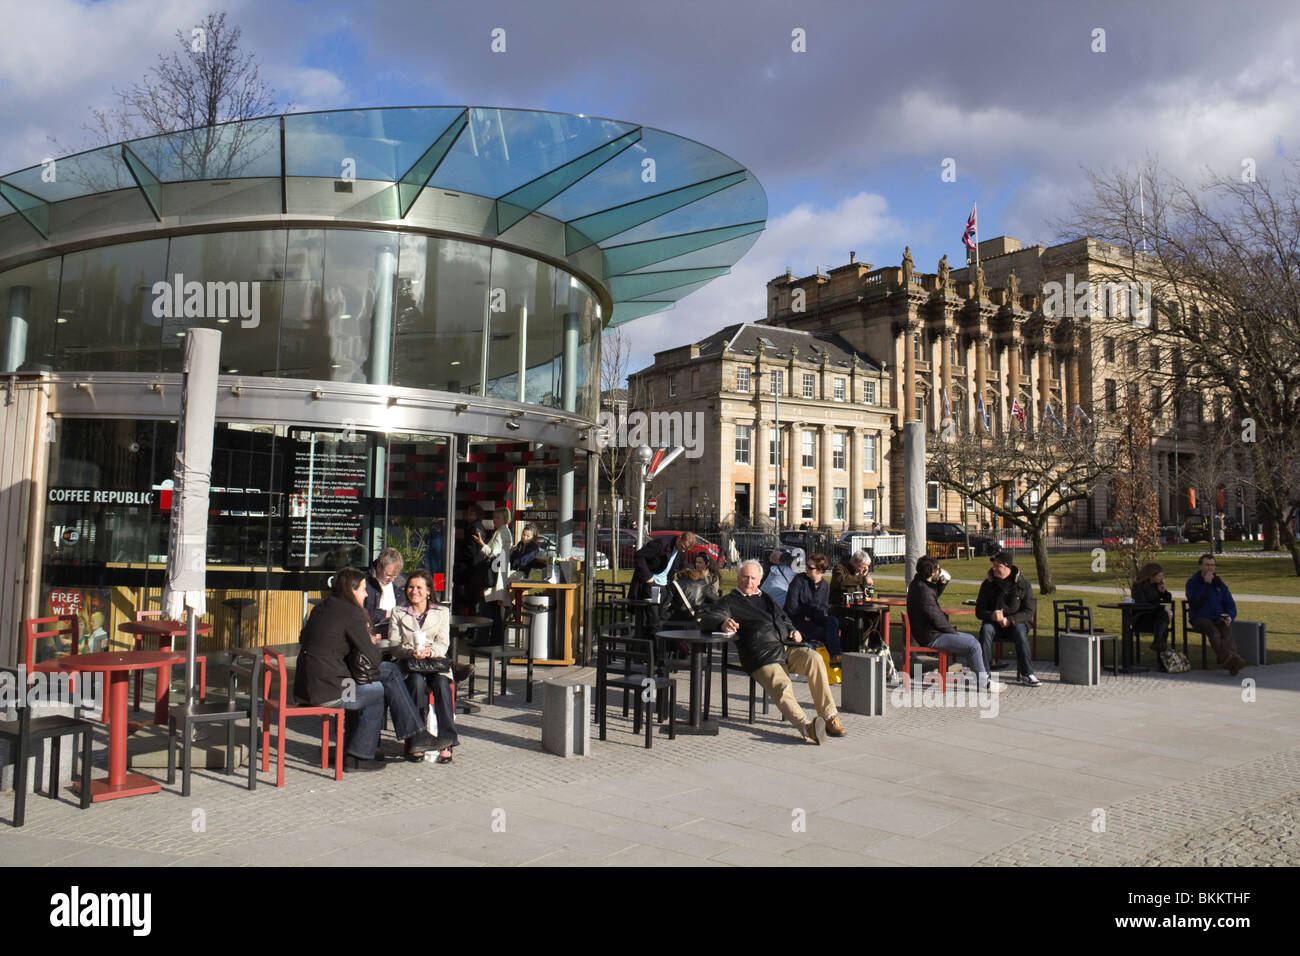 St Andrew Square Edinburgh with Coffee Republic outdoor café, customers in warm clothing sitting outdoors in March sunshine Stock Photo